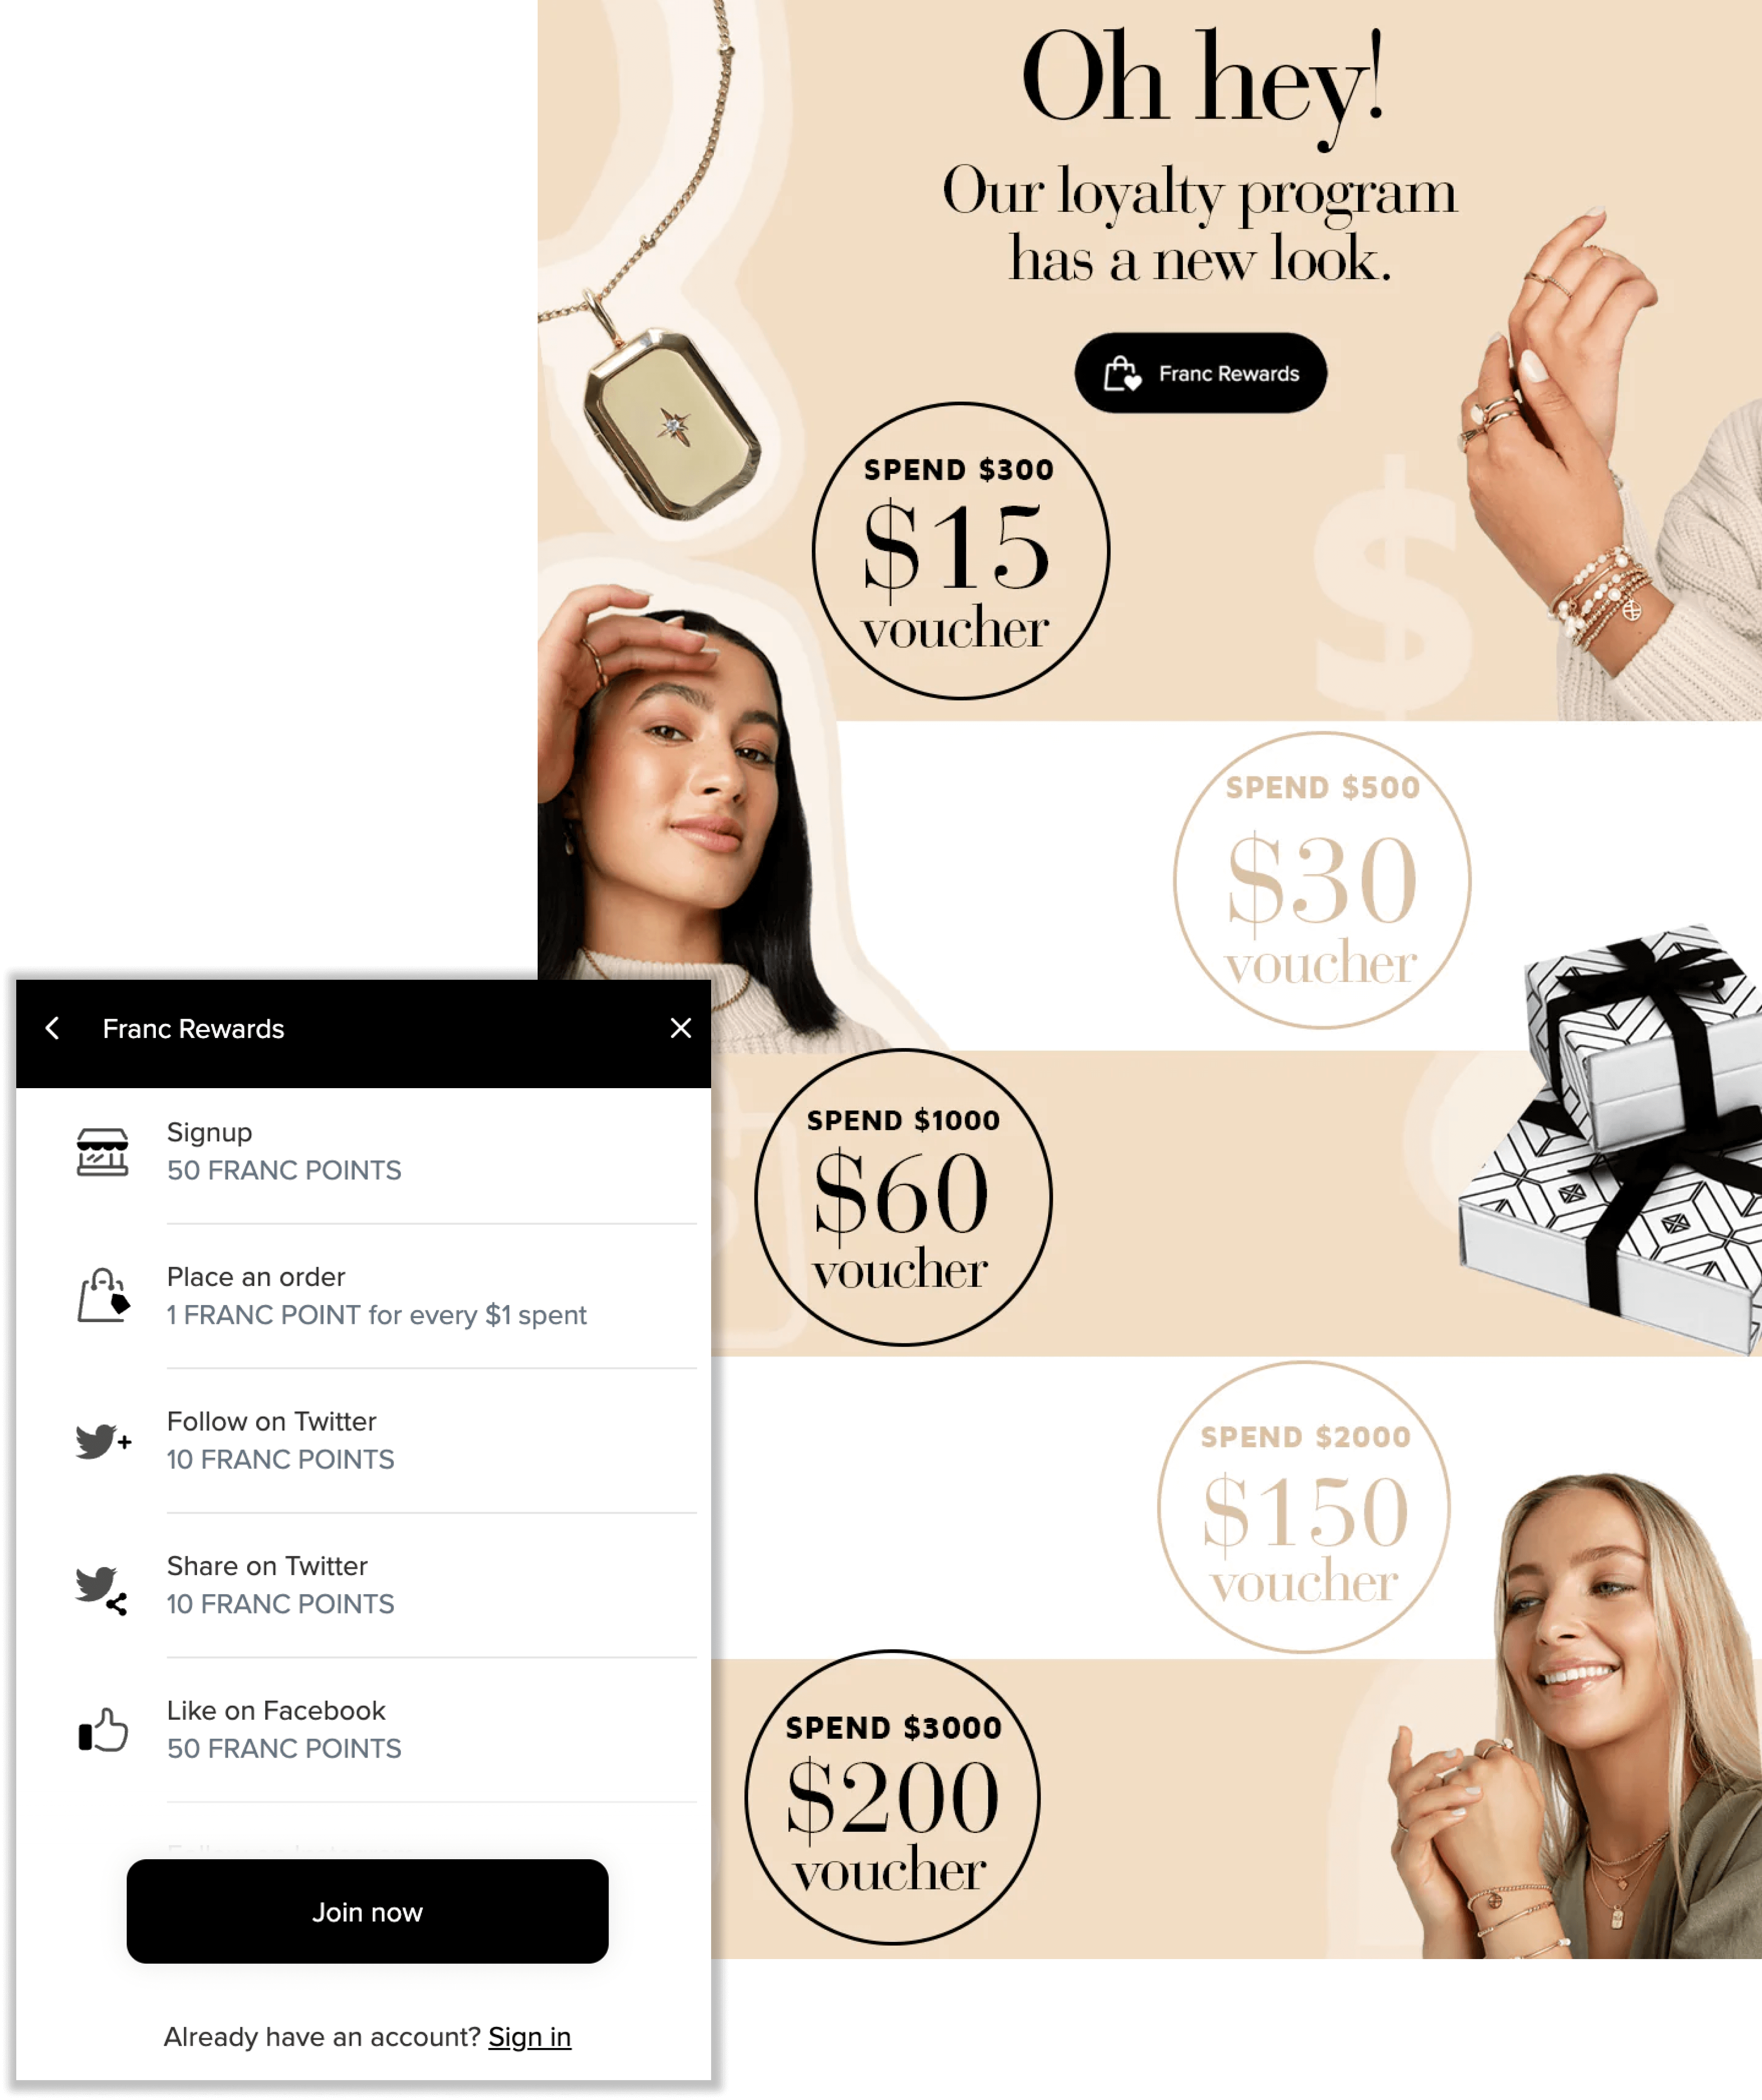 Francesca’s rewards program explainer page and rewards panel. The page shows a graphic with multiple levels of rewards. Surrounding these graphics are images of women wearing jewelry, gift boxes, and product shots of jewelry. The rewards are: Spend $300 for a $15 voucher, spend $500 for a $30 voucher, spend $1000 for a $60 voucher, spend $2000 for a $150 voucher, and spend $3000 for a $300 voucher. The rewards panel shows the various ways to earn points including signing up, purchases, and interacting on Twitter or Facebook. 